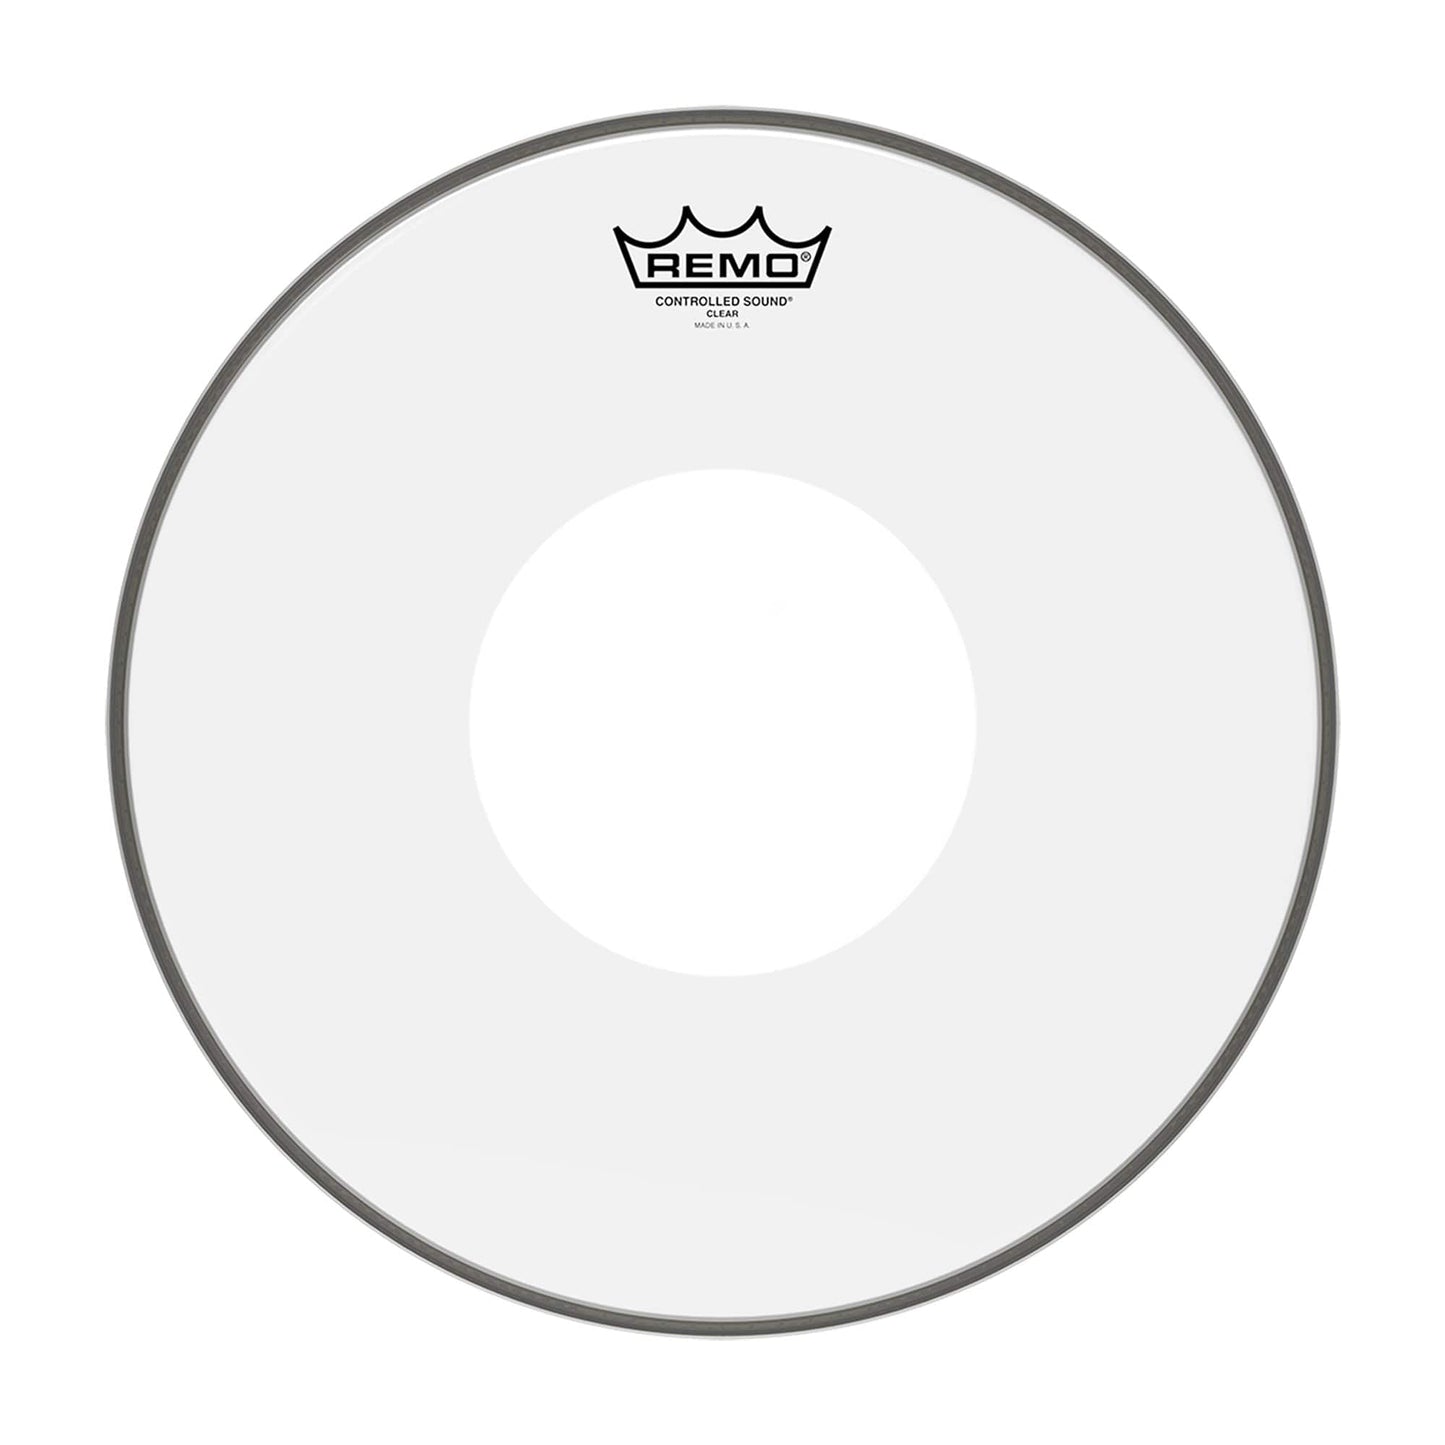 Remo 18" Controlled Sound Clear Drumhead w/Top White Dot Drums and Percussion / Parts and Accessories / Heads